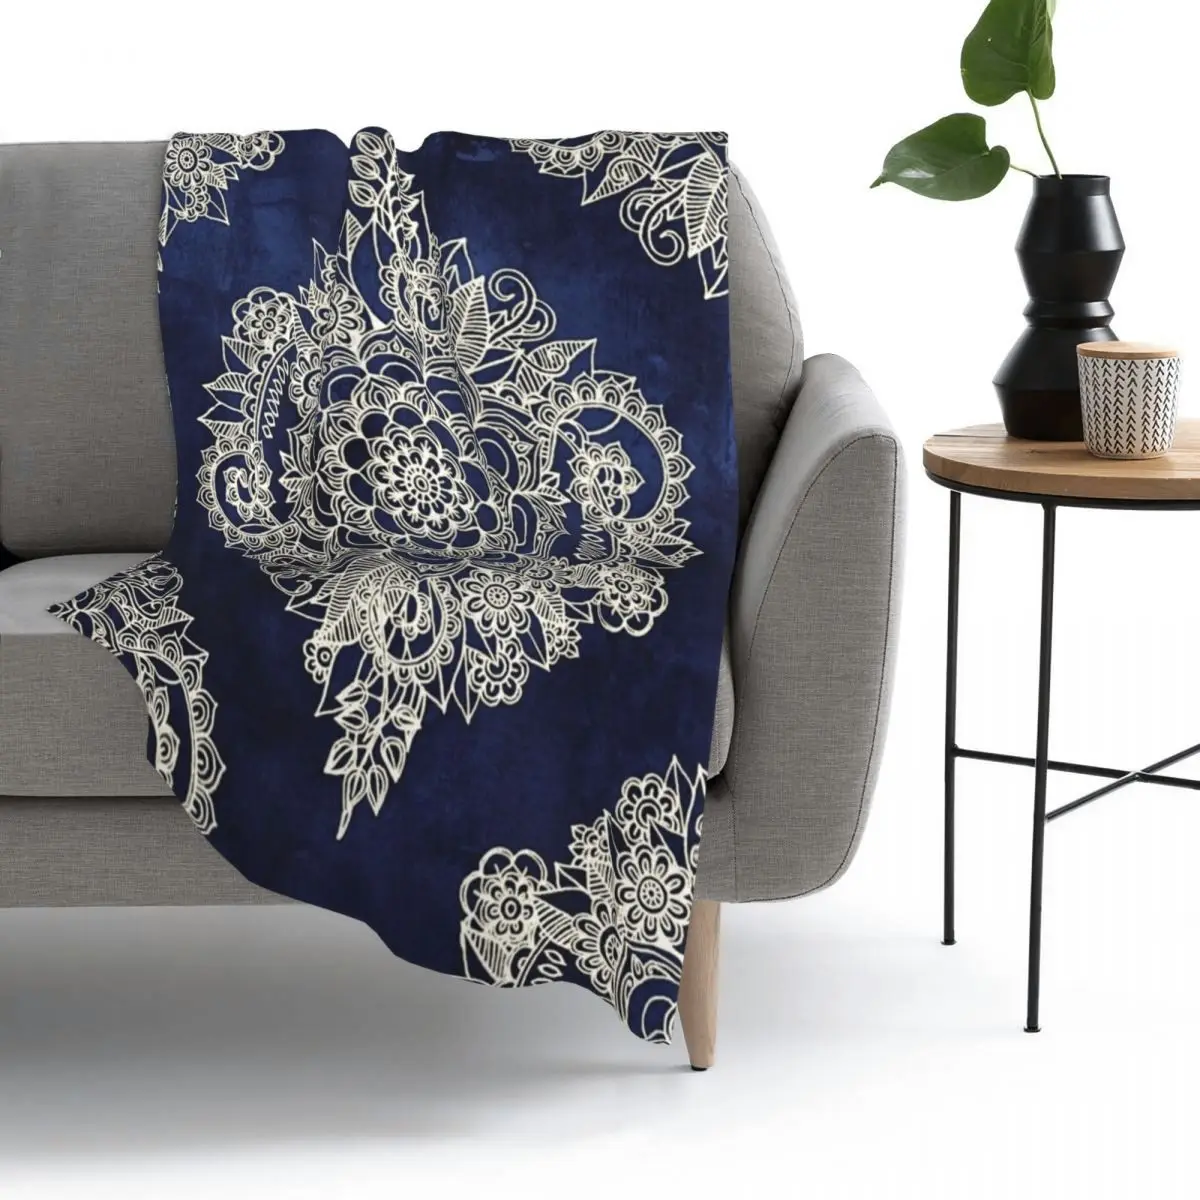 

Cream Floral Moroccan Pattern On Deep Indigo Ink Blanket Flannel Multi-function Throw Blanket for Home Bedroom Travel Throws